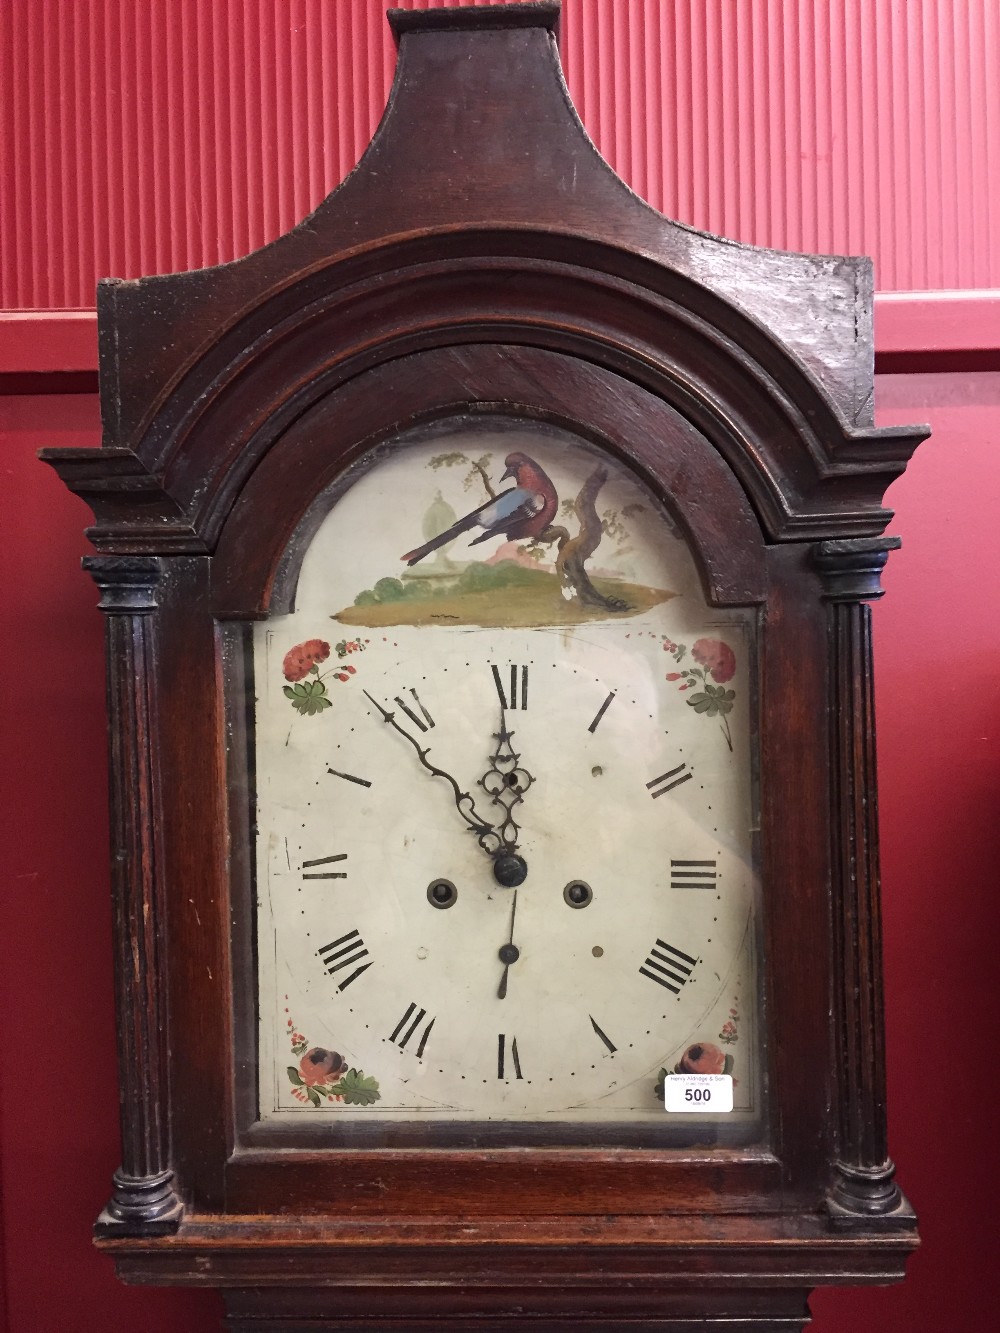 Clocks: 19th cent Mahogany long case 8 day clock. Painted arch dial, Roman numerals. Seconds hand at